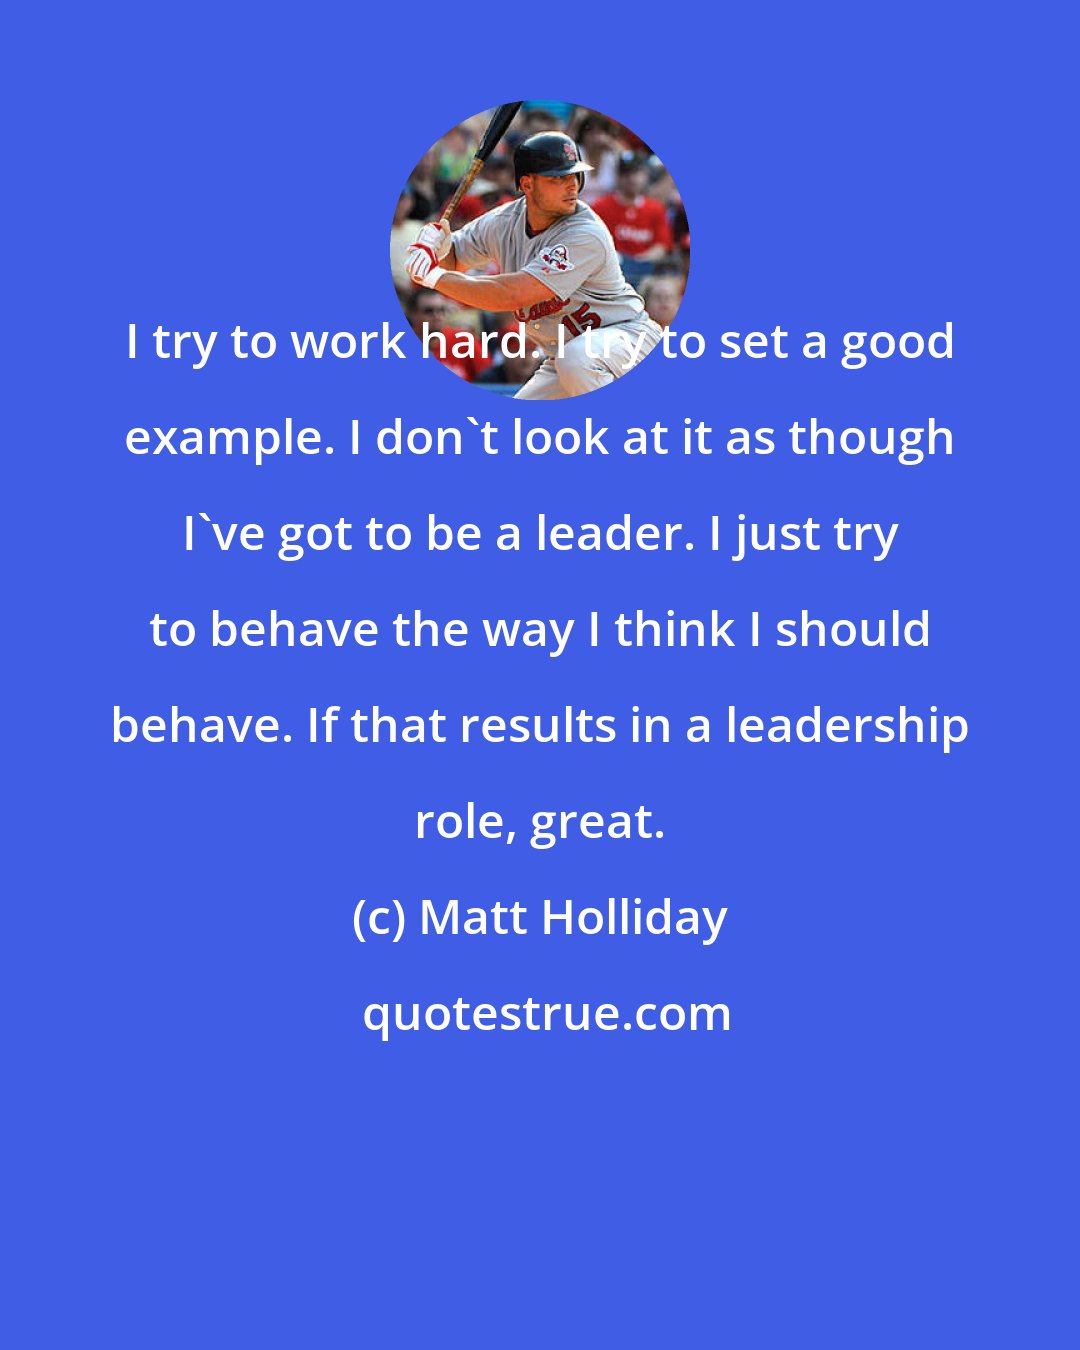 Matt Holliday: I try to work hard. I try to set a good example. I don't look at it as though I've got to be a leader. I just try to behave the way I think I should behave. If that results in a leadership role, great.